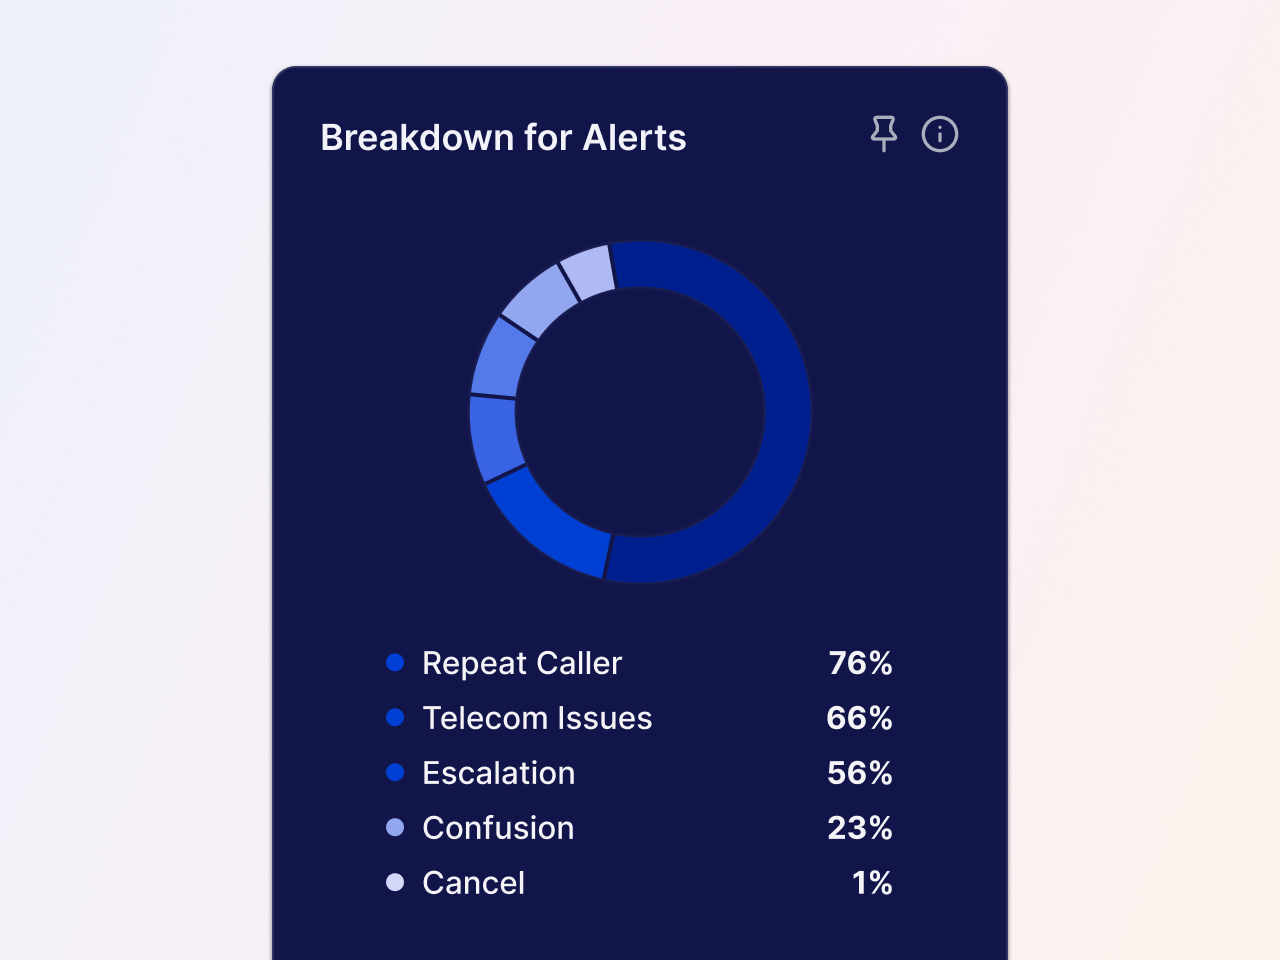 Alert breakdown from a particular data collection, helping show how many messages come from repeat callers, escalations, and more.